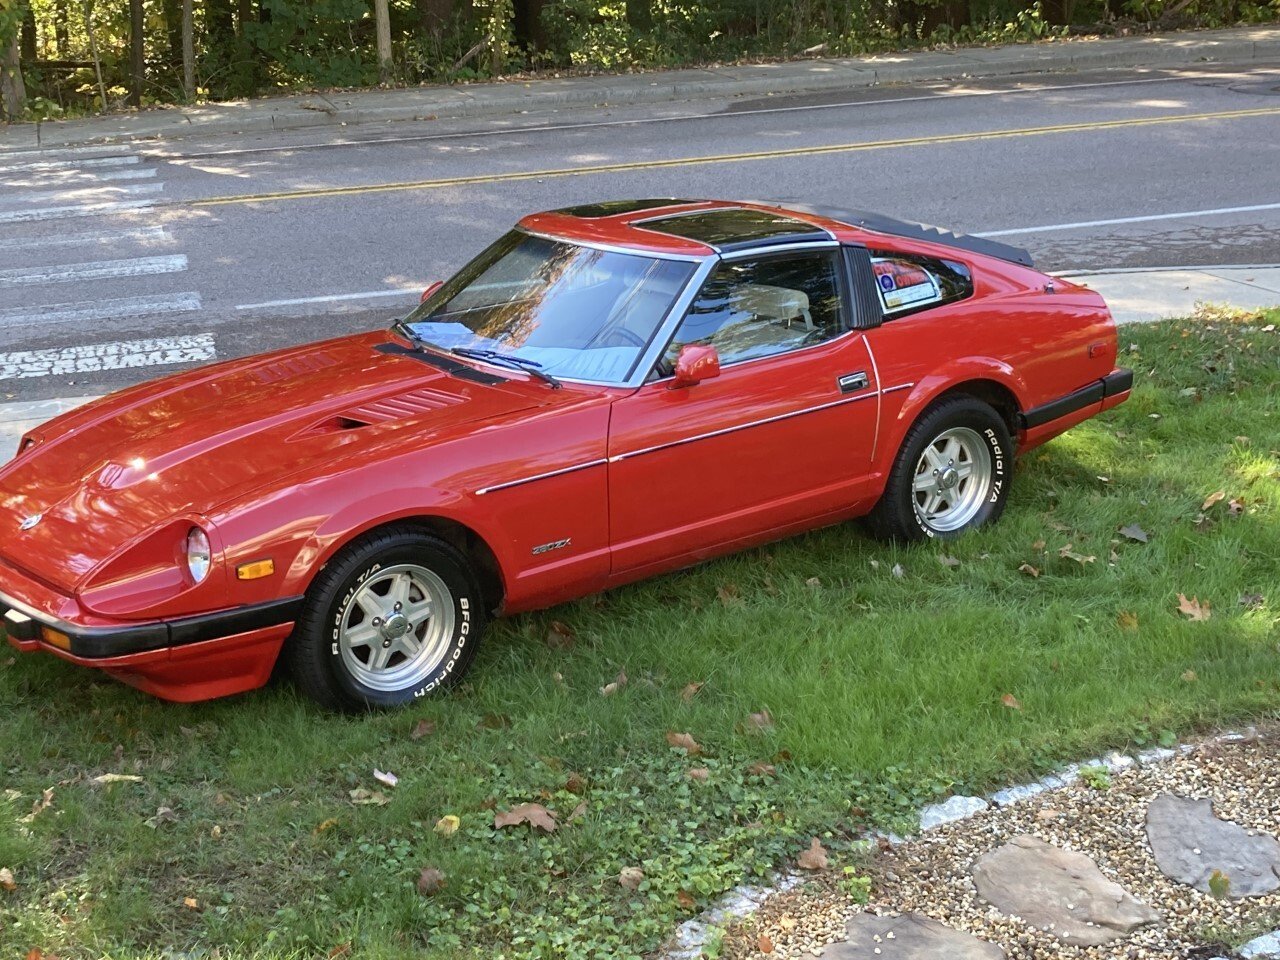 1983 Datsun 280ZX Classic Cars for Sale - Classics on Autotrader